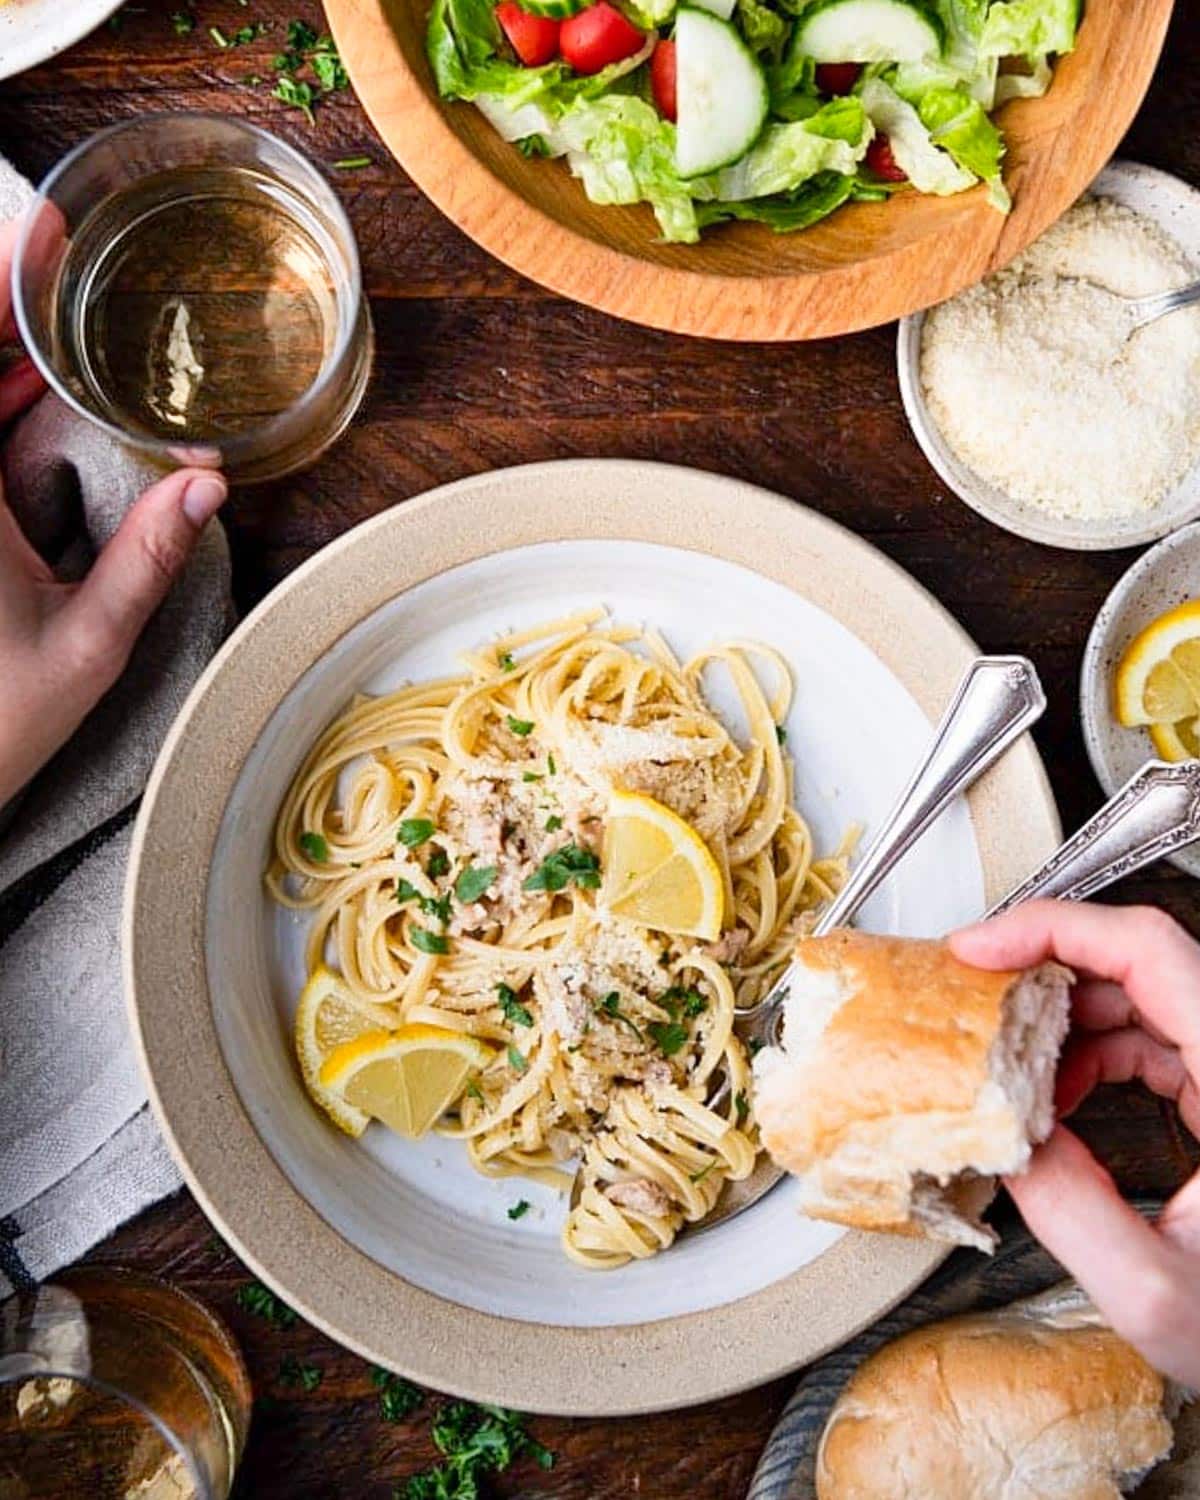 Hands holding a piece of French bread alongside a bowl of linguine with clam sauce.